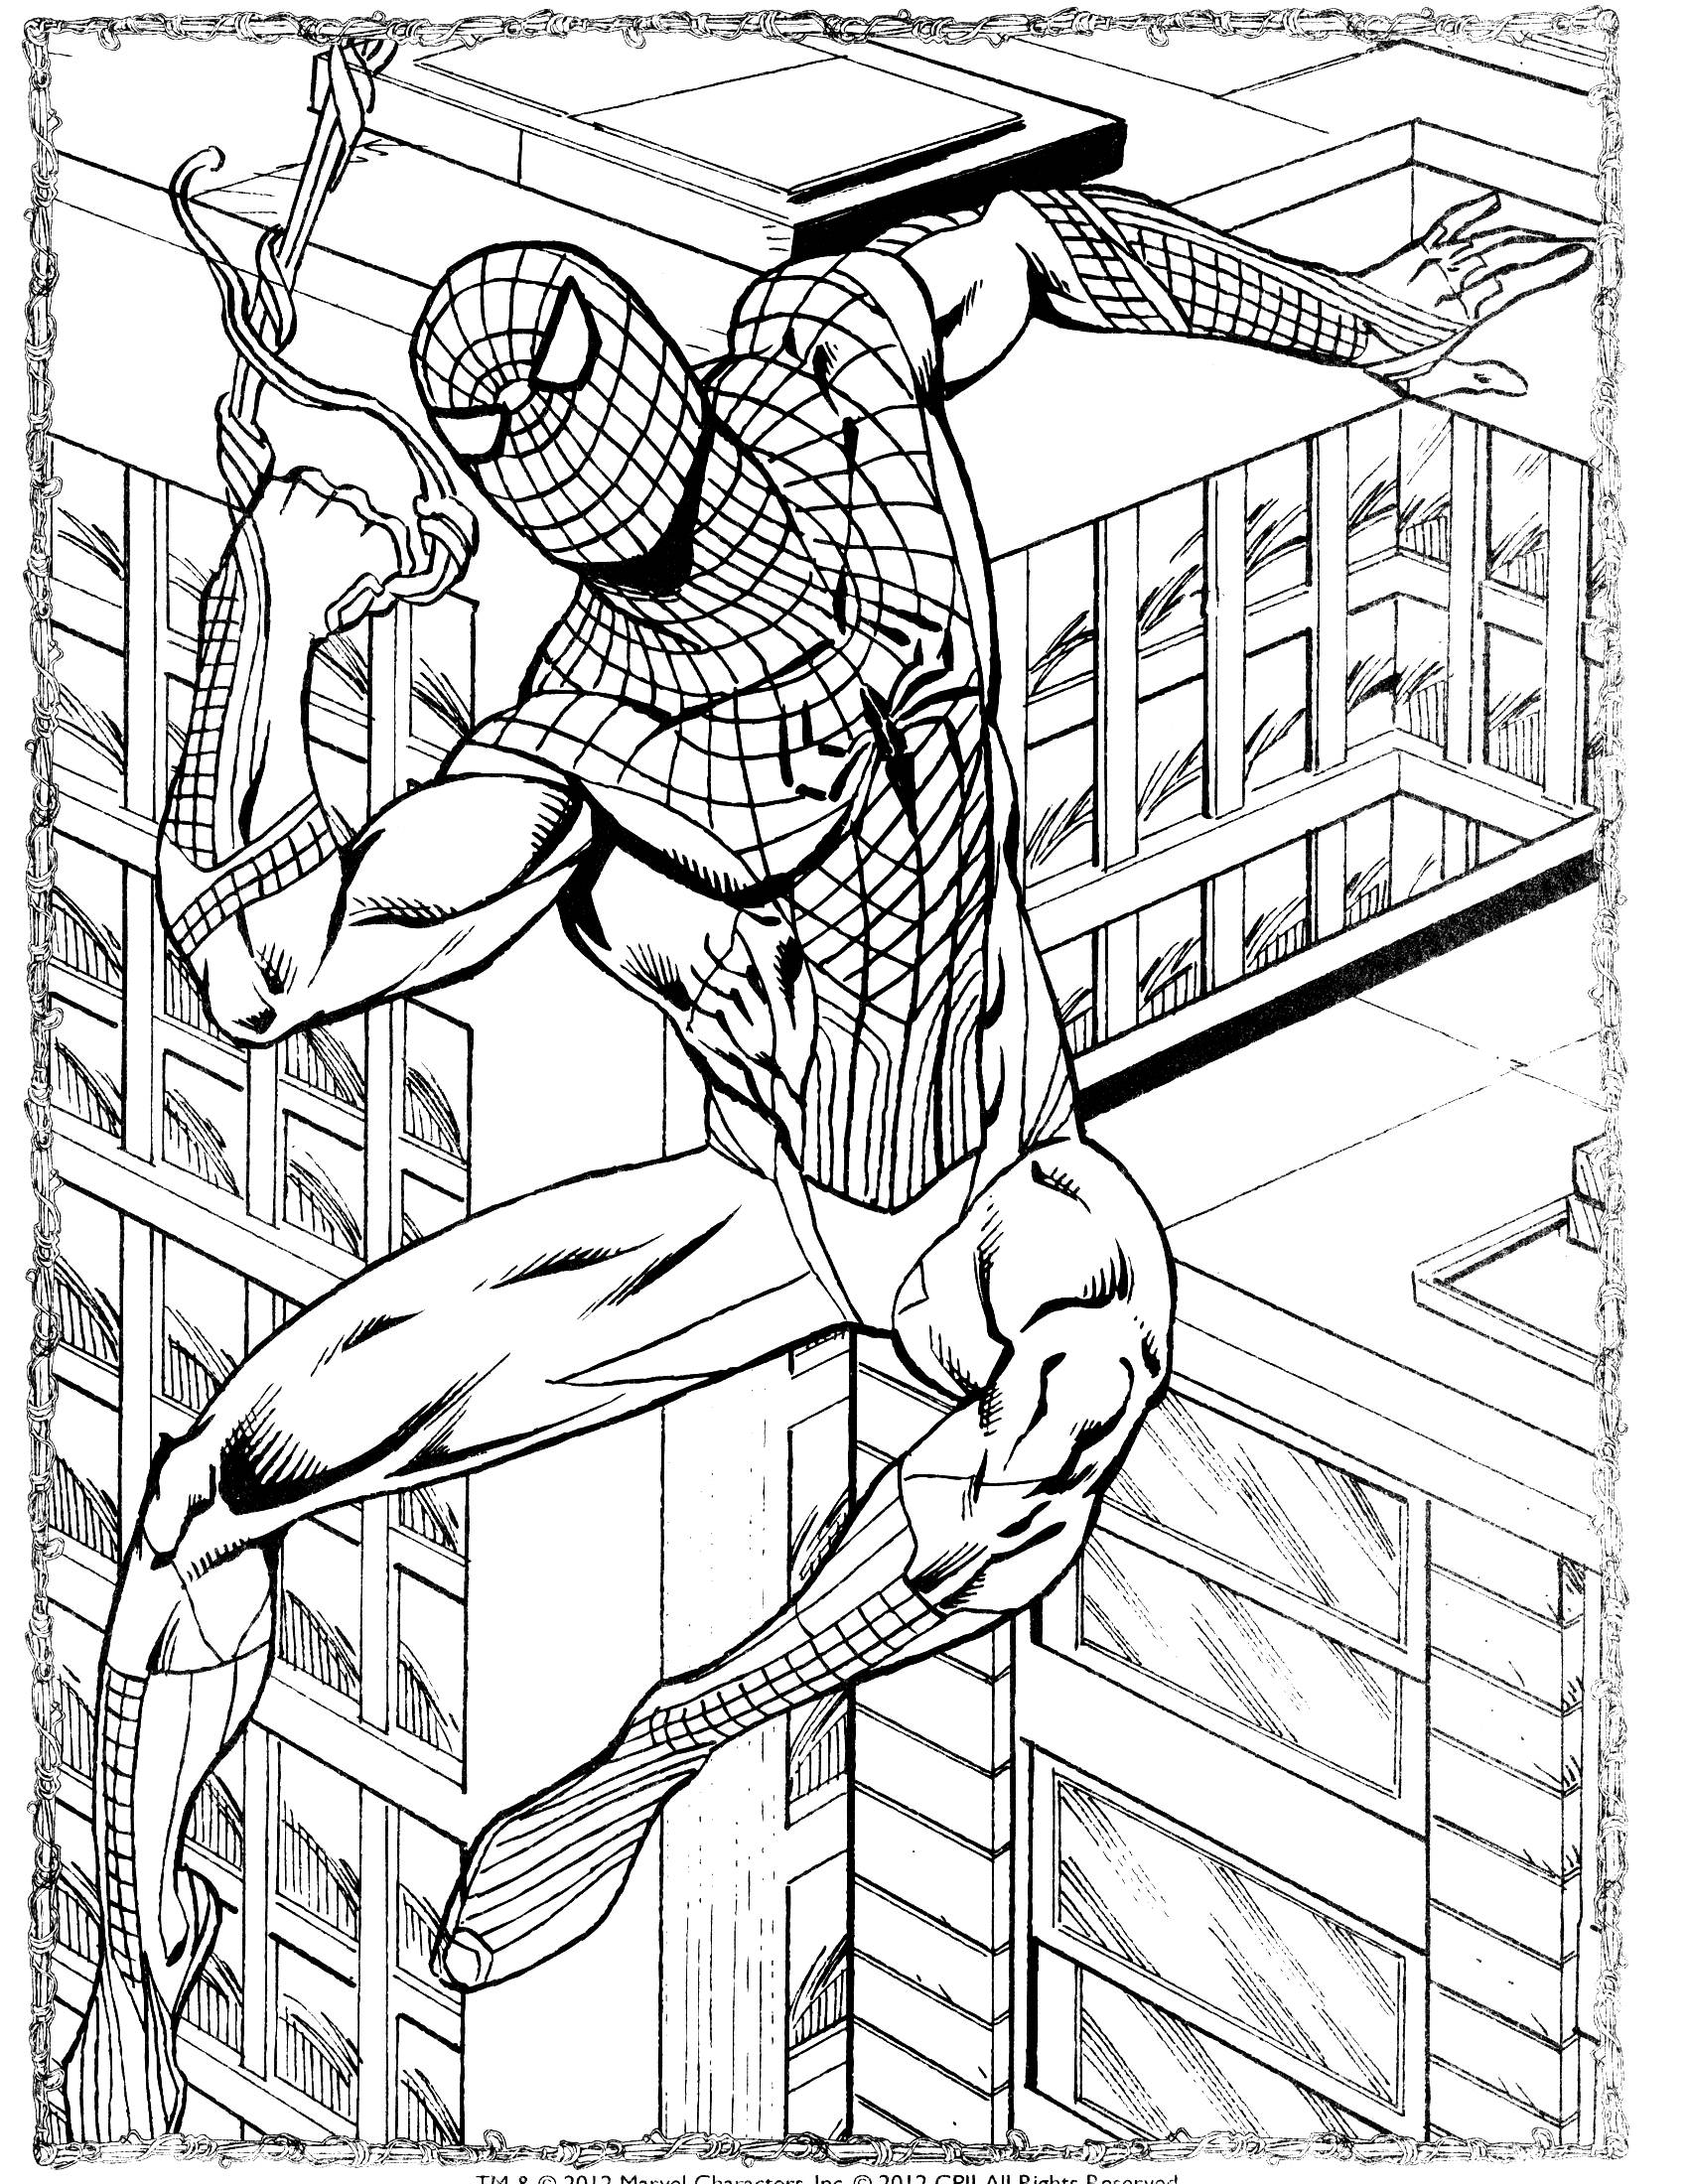 Spiderman Coloring Pages To Color Online - Coloring